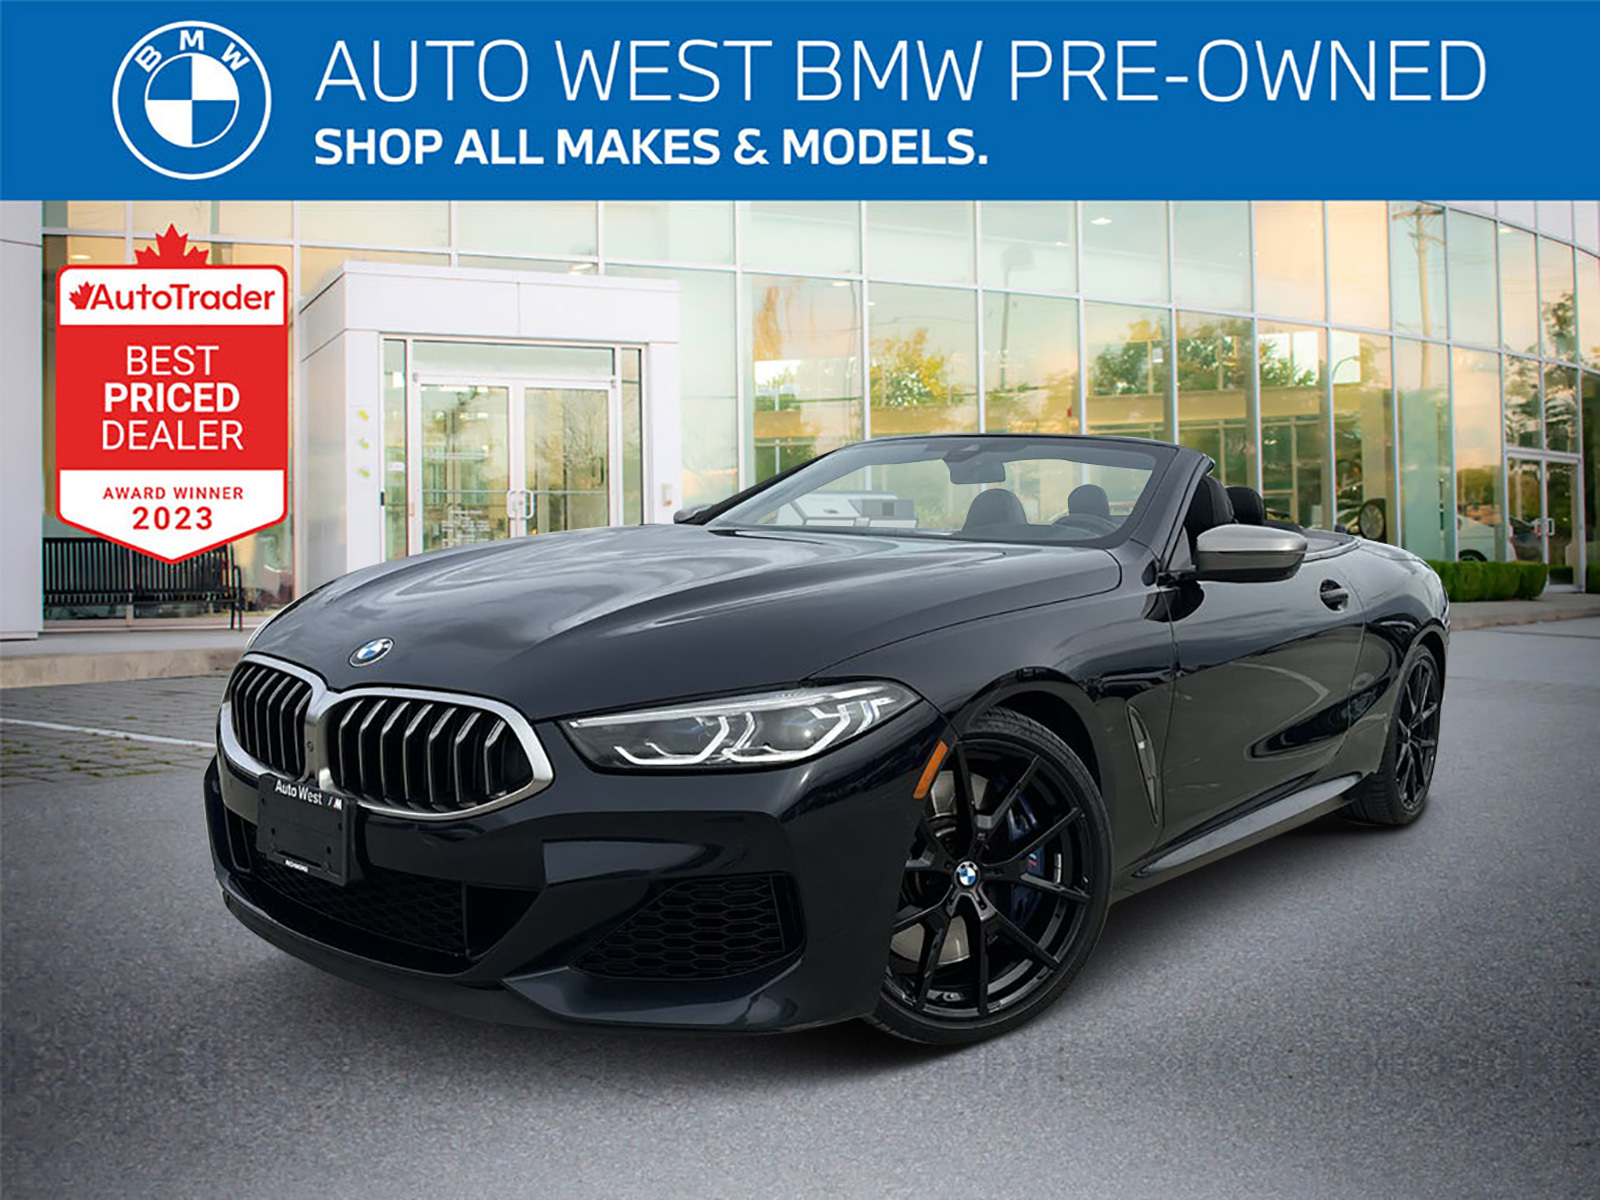 2020 BMW 8 Series M850i xDrive Cabriolet | Clean | LowKM